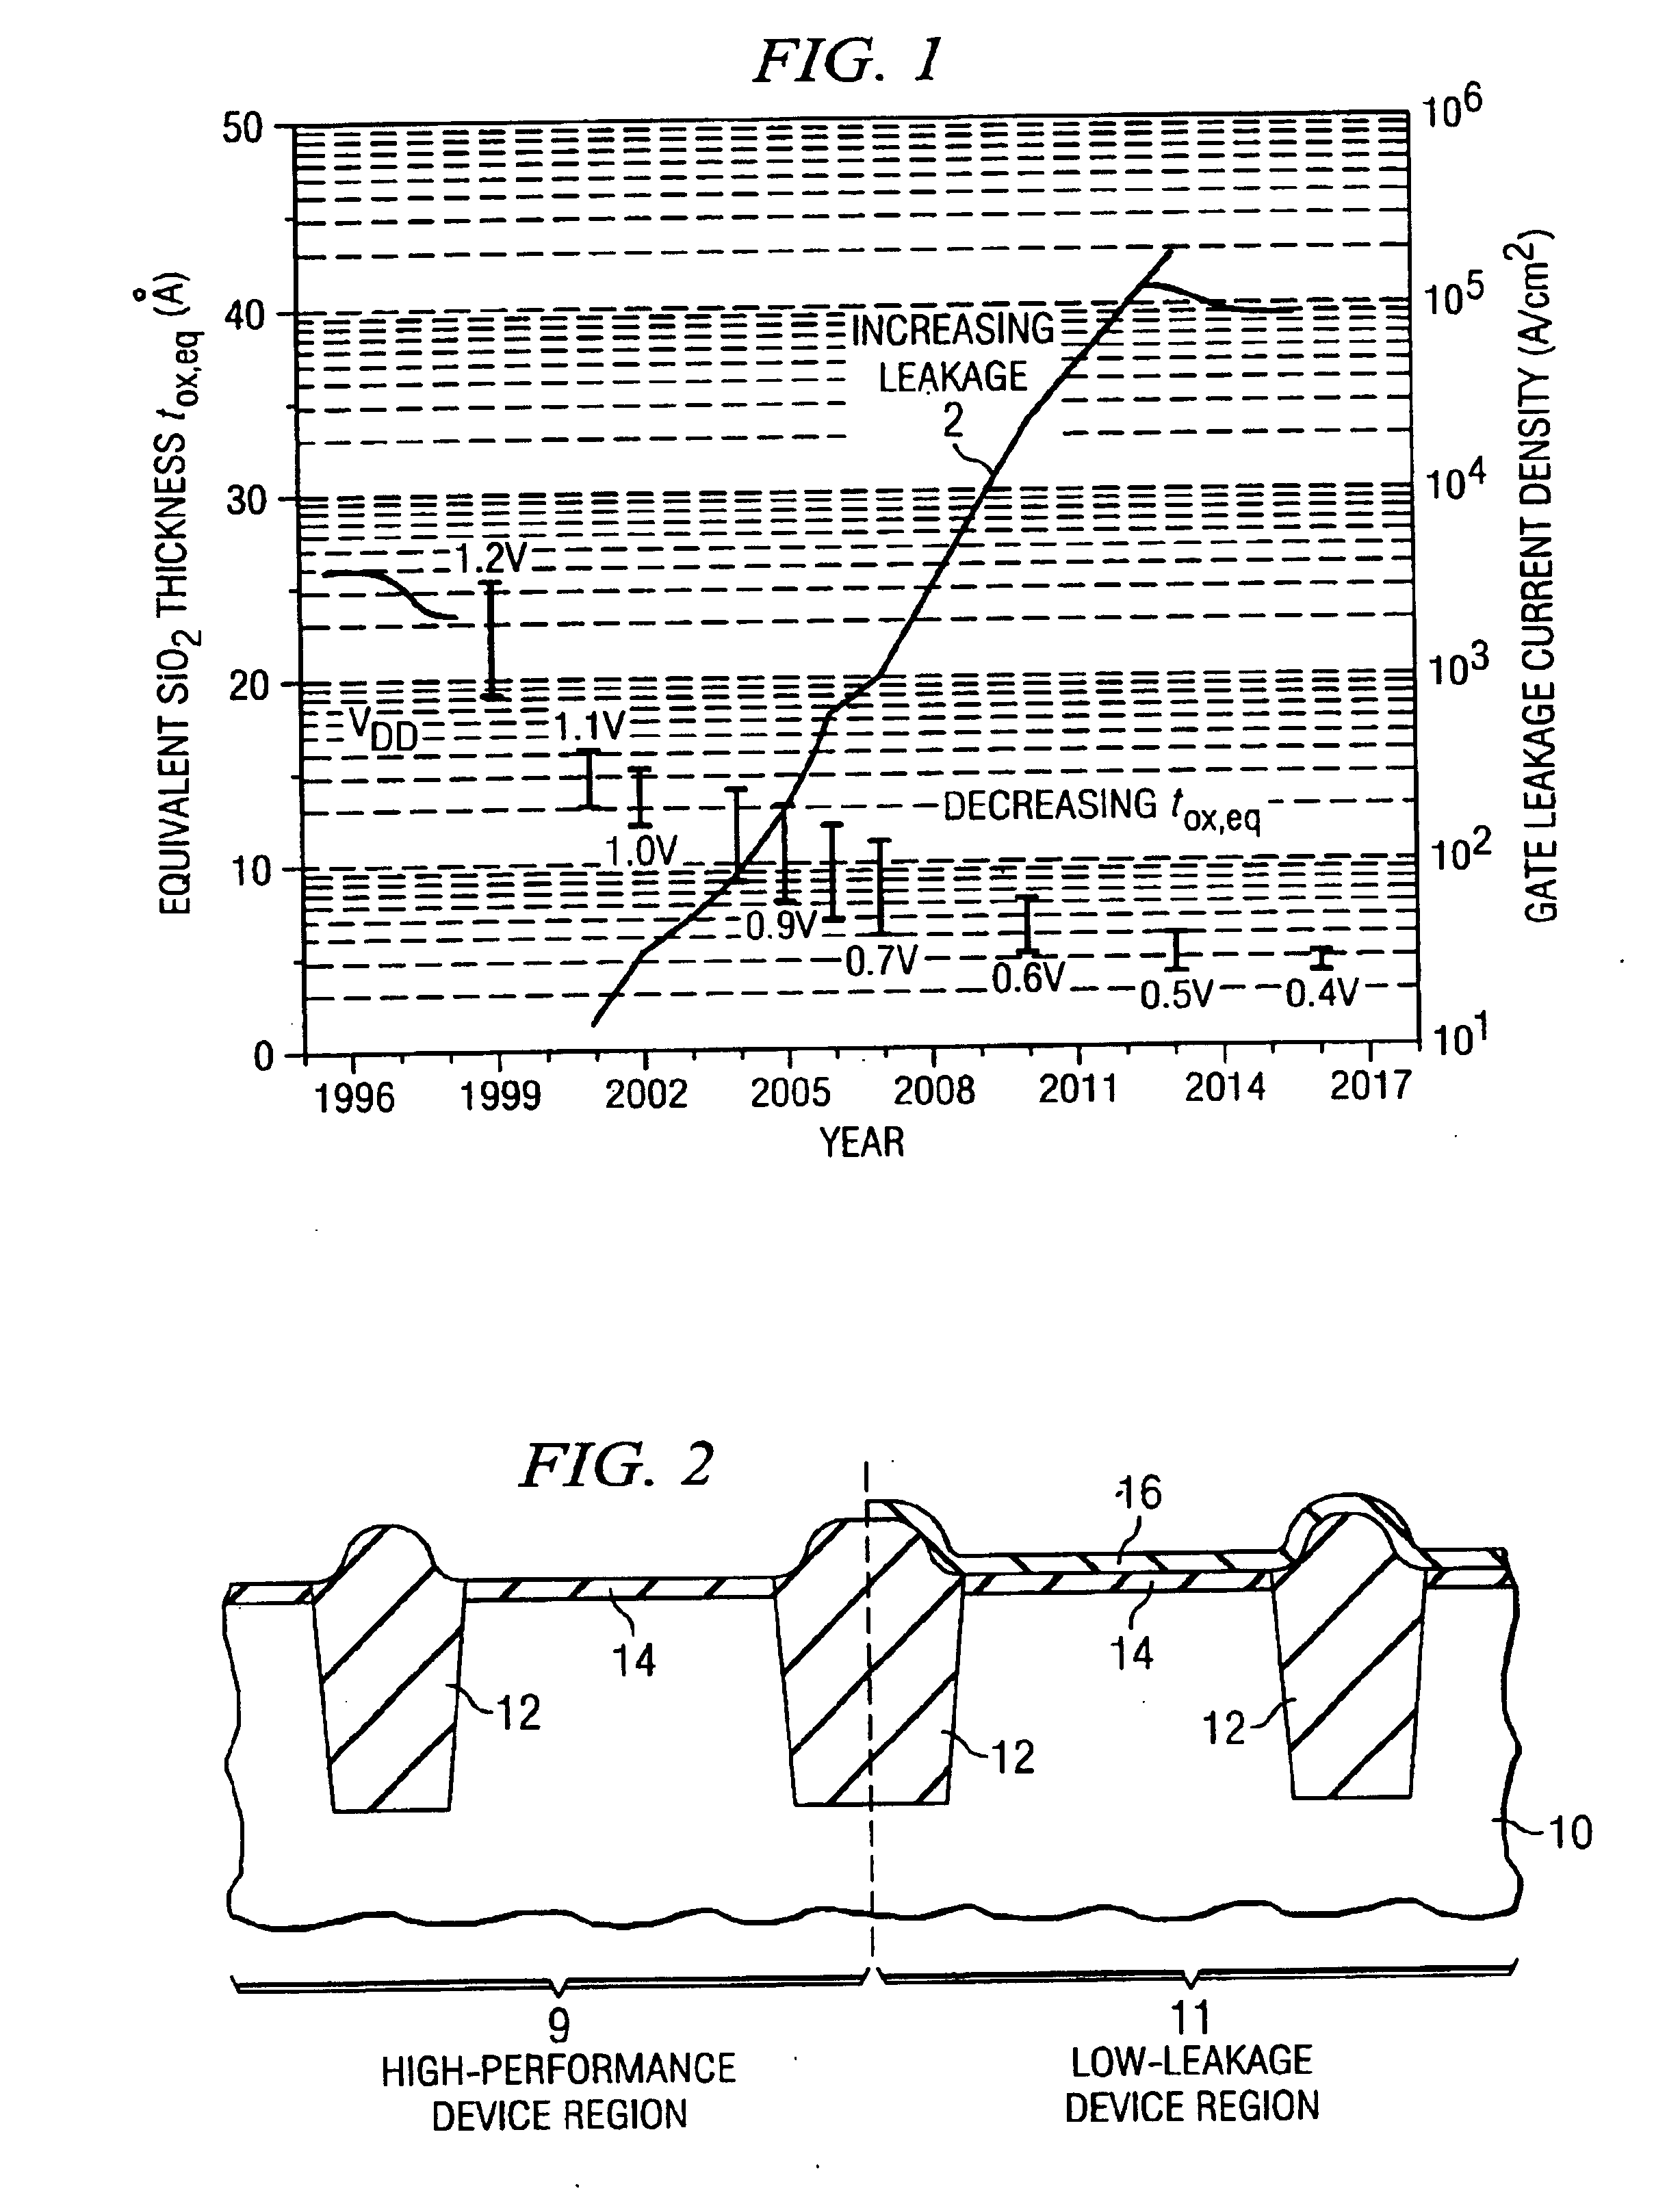 Semiconductor chip with gate dielectrics for high-performance and low-leakage applications